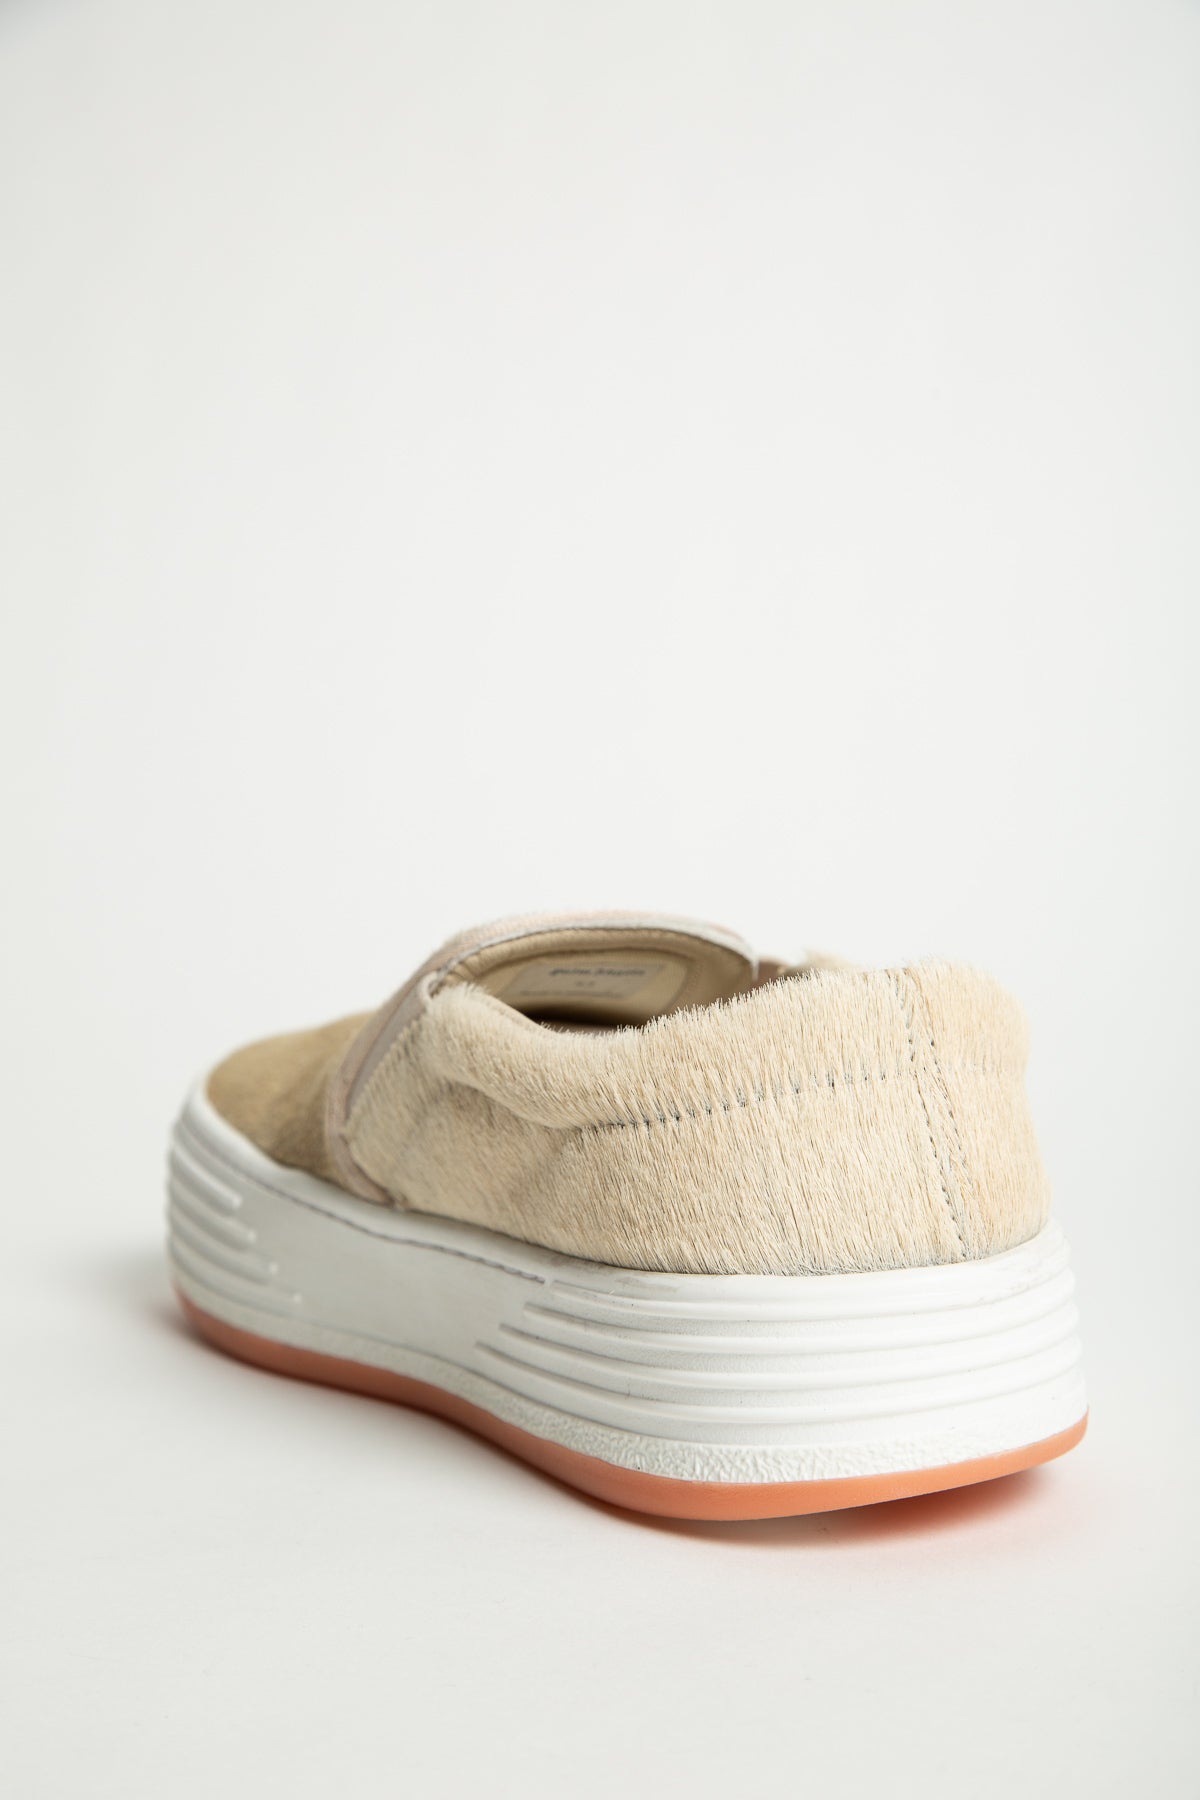 PALM ANGELS | SNOW SLIP-ON SNEAKERS